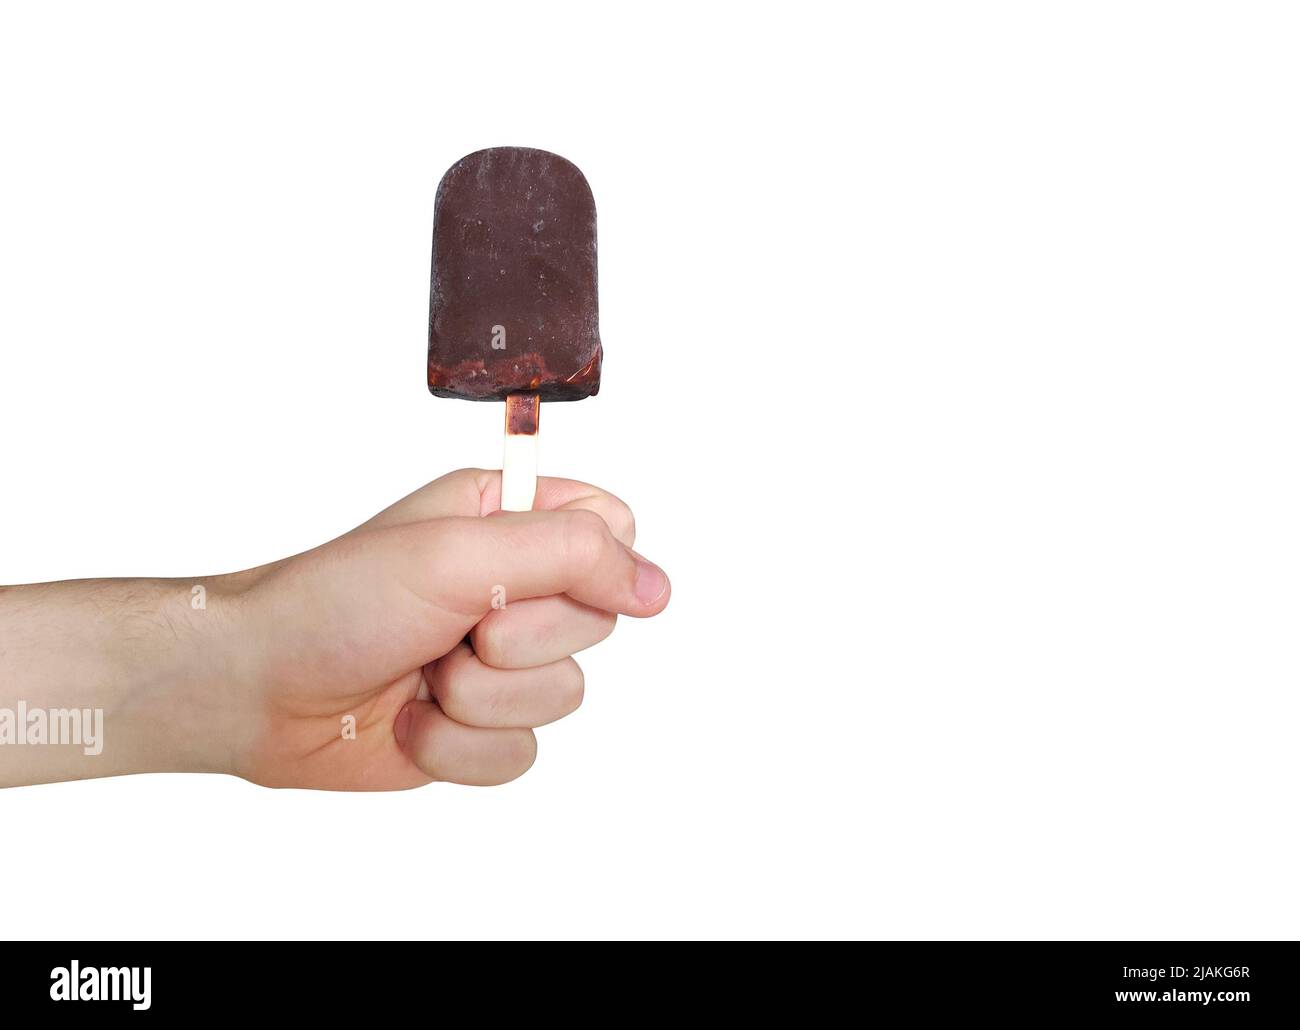 Chocolate ice-cream isolated on white background. Popsicle in male hand. Stock Photo